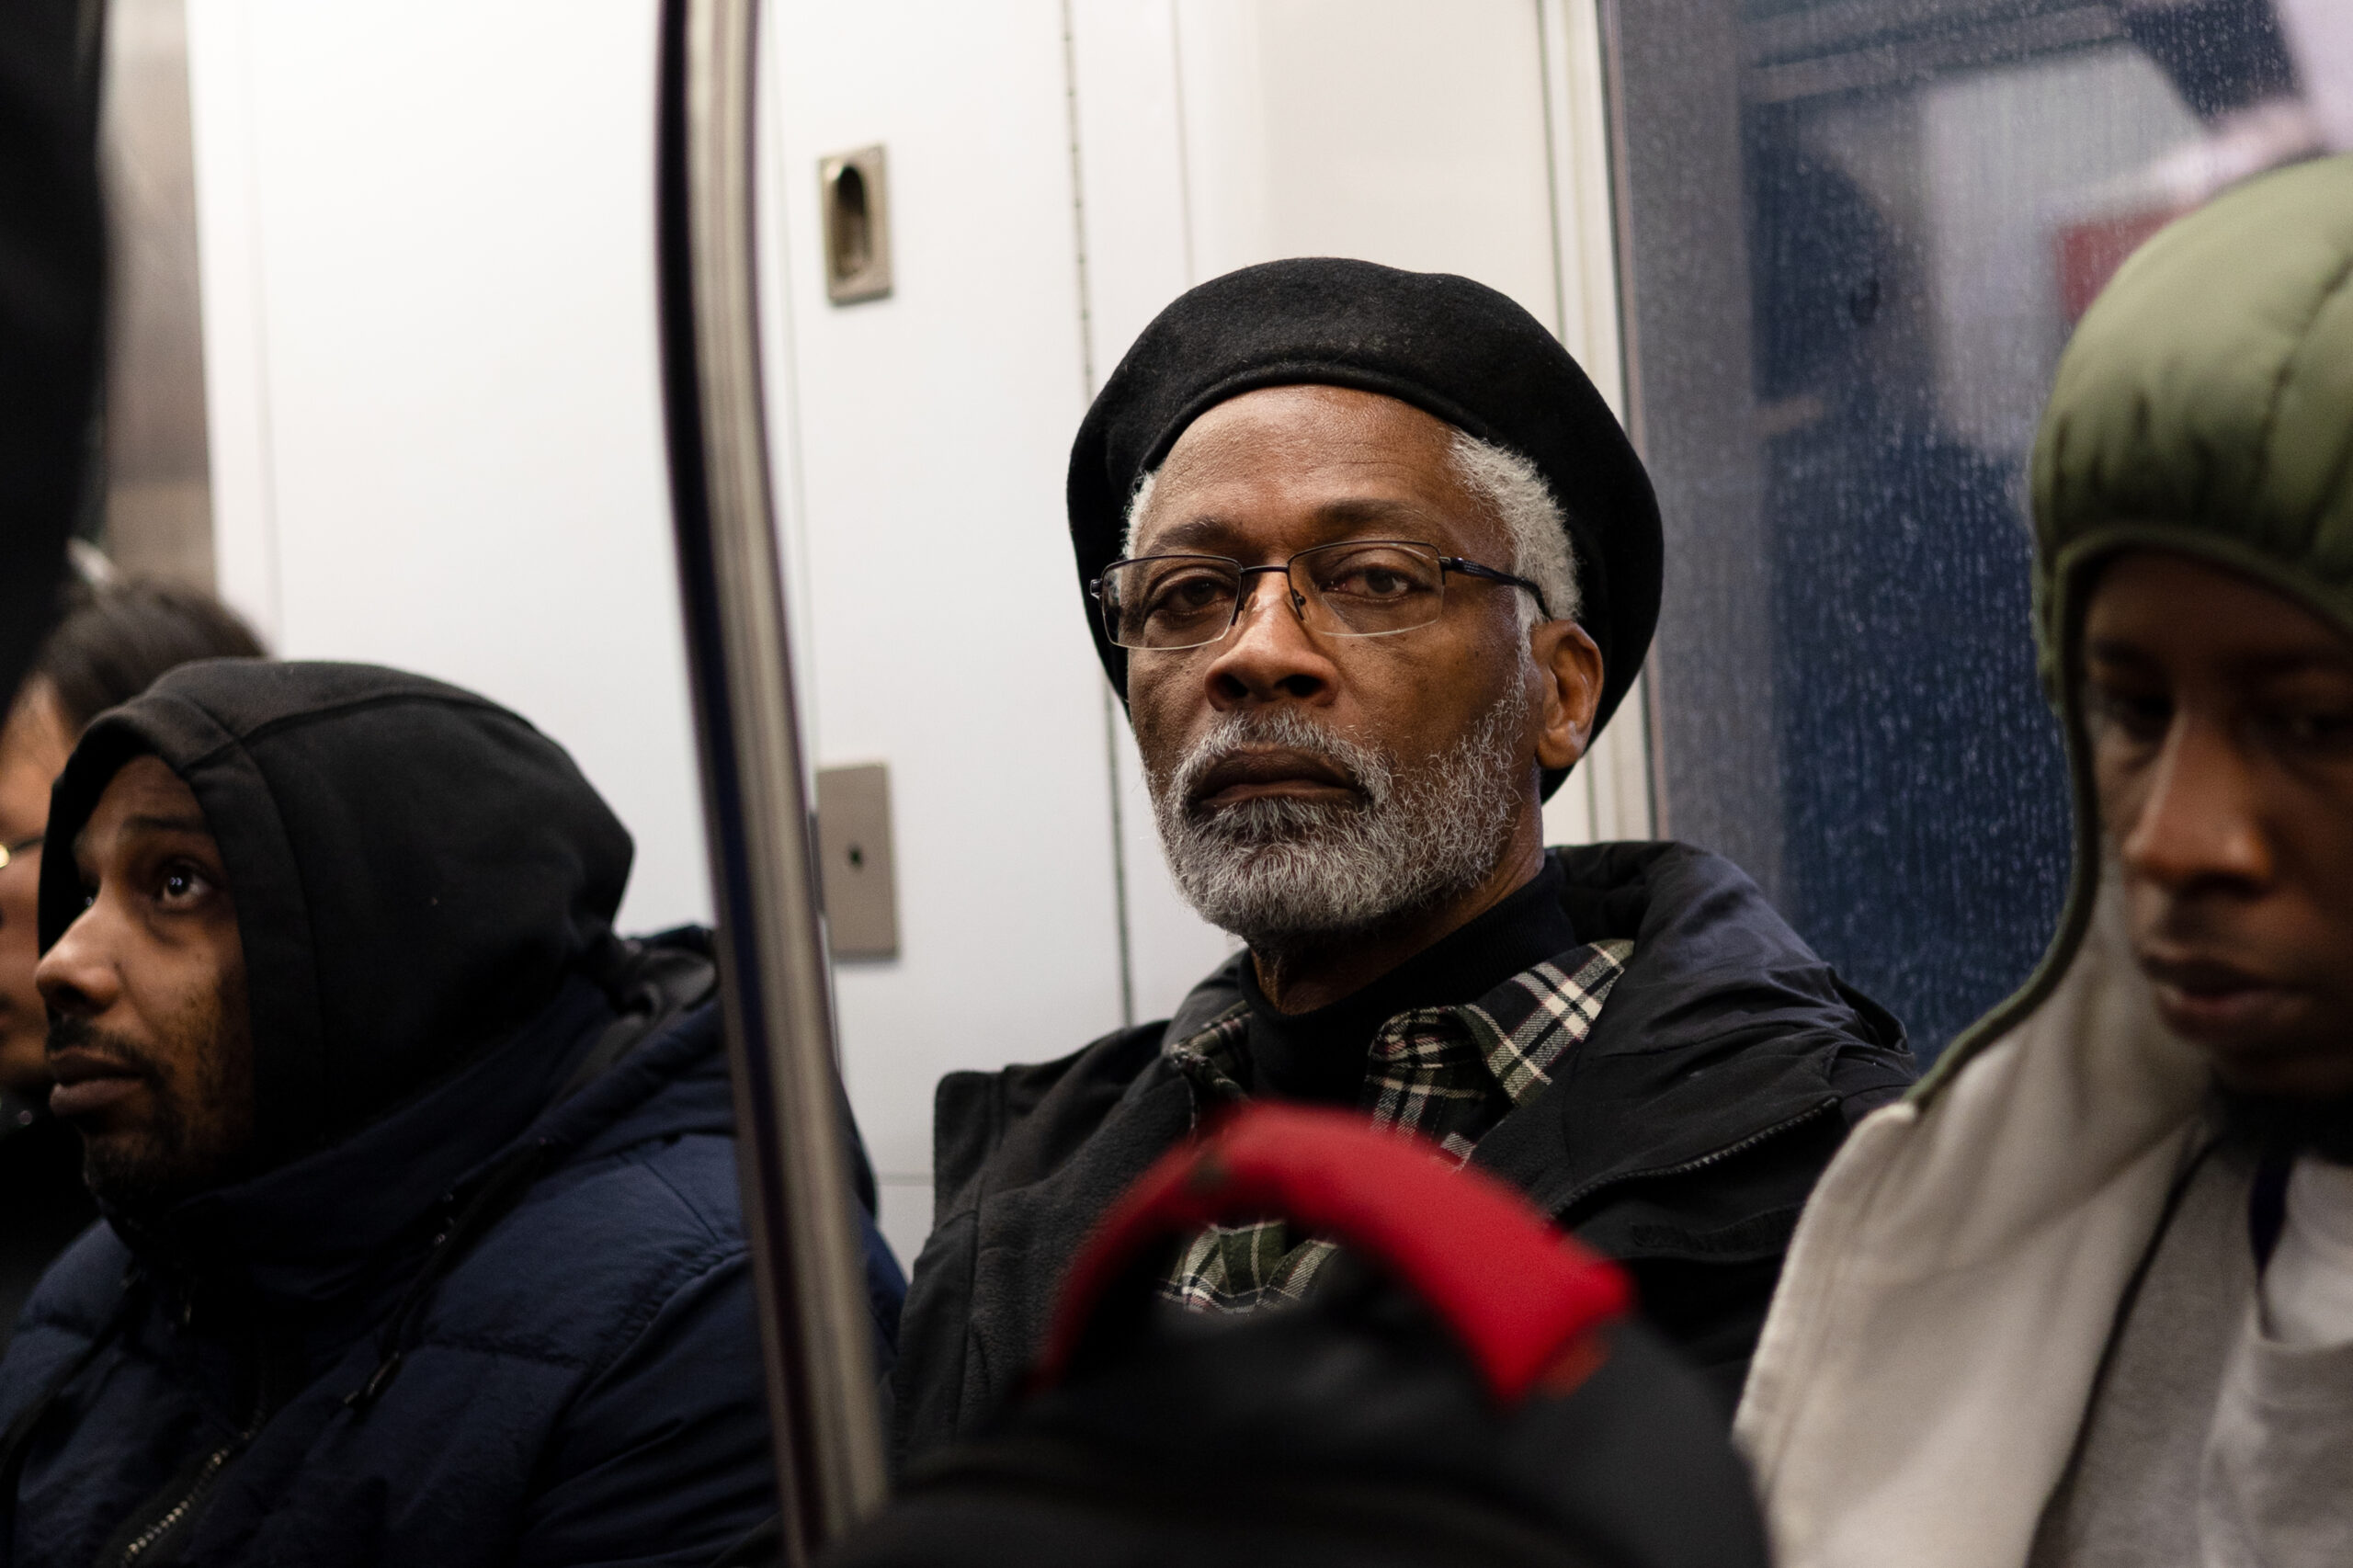 Seated in a subway car, a man stares directly at the camera with no expression on his face. His white beard and hair contrasts with his dark features. He is wearing a beret and glasses.